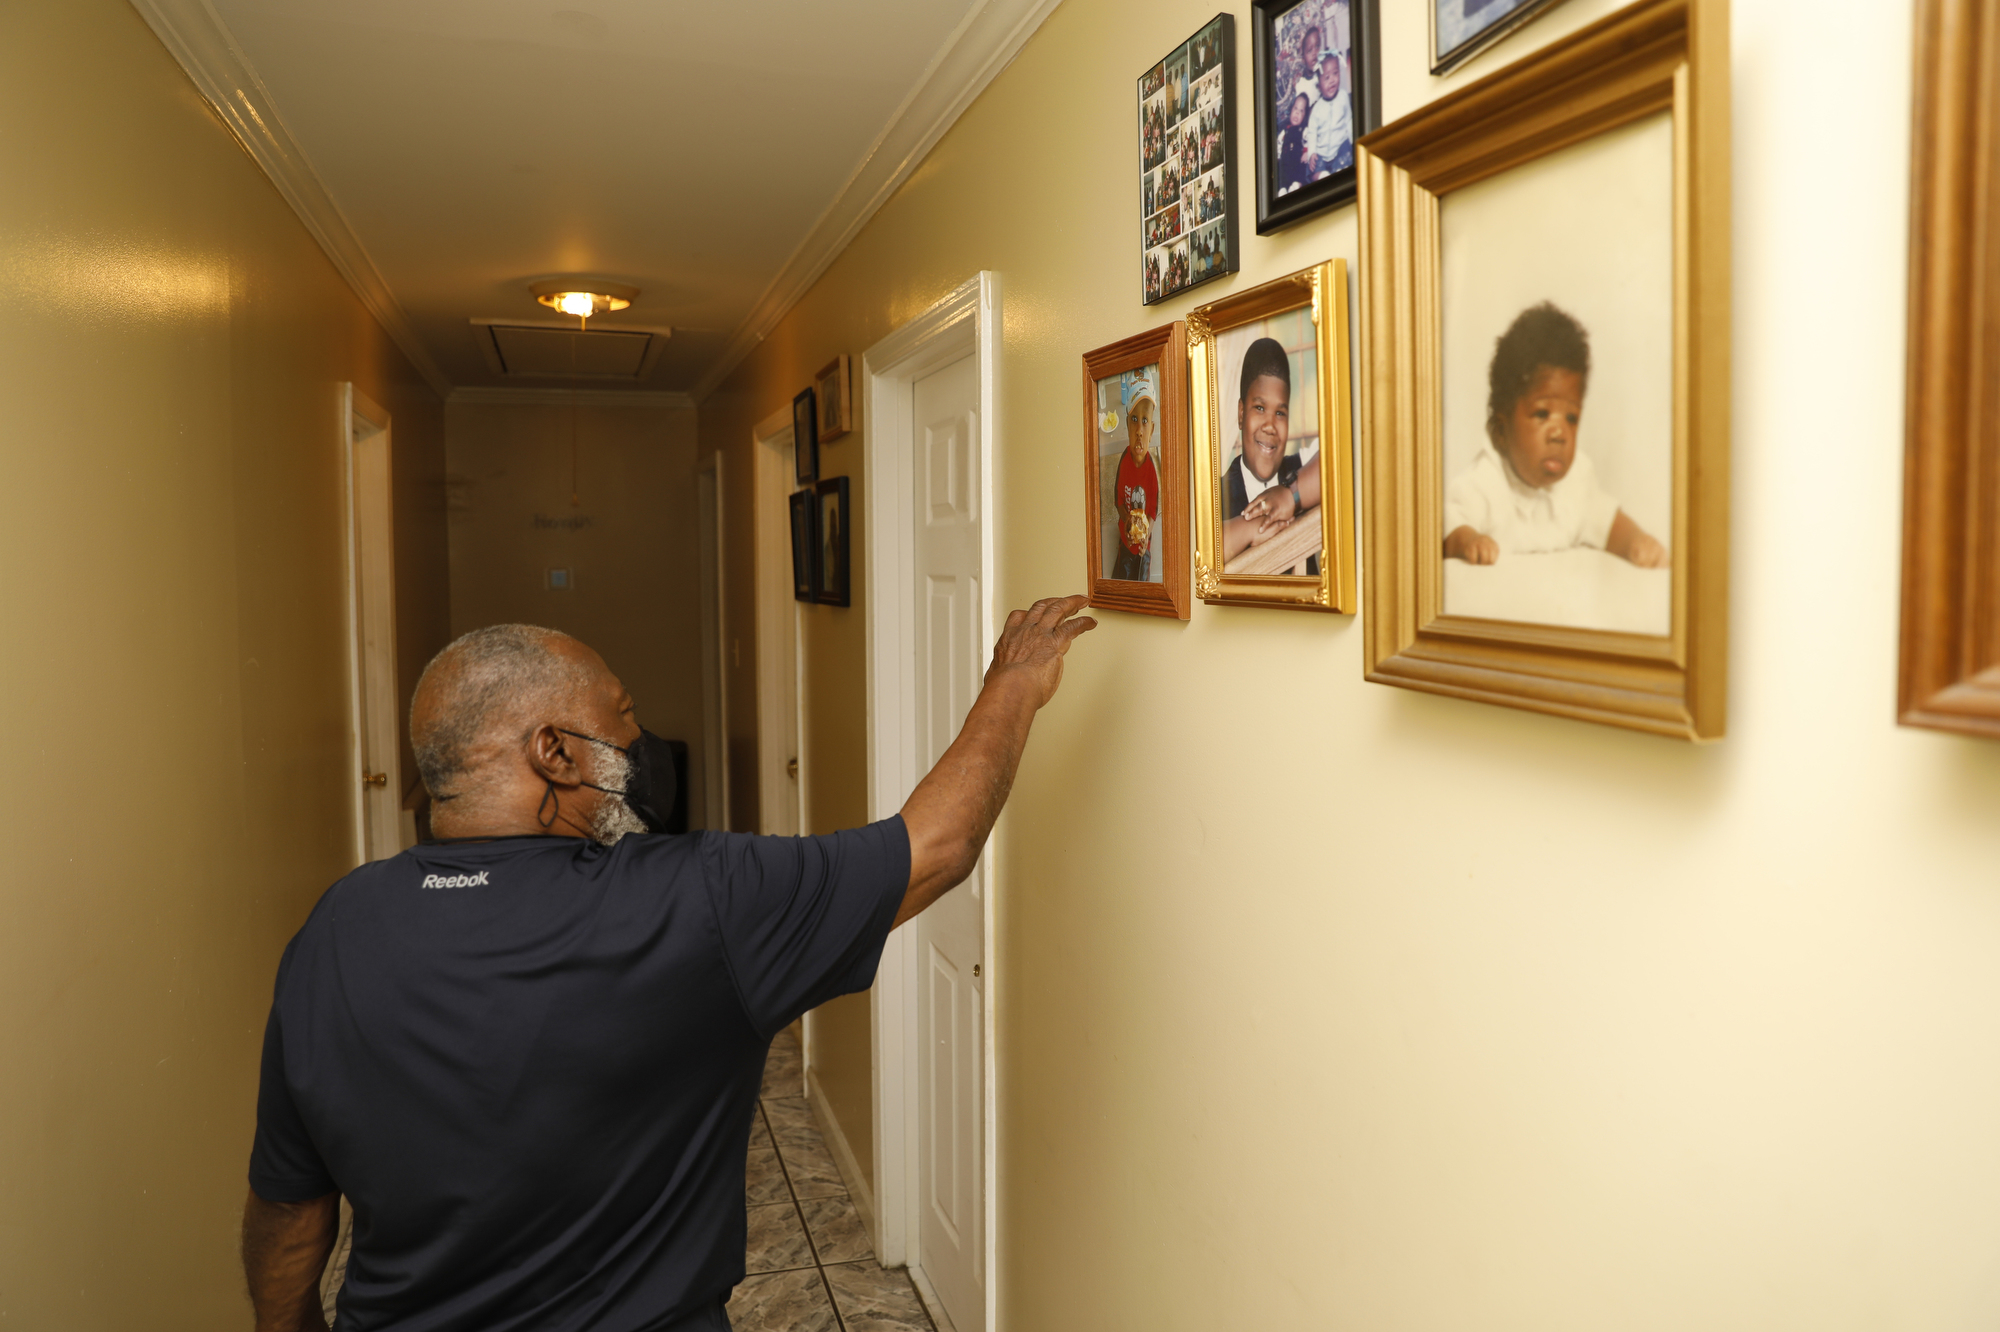 Mabry walks through his hallway lined with family photos. Credit: Octavio Jones for ProPublica